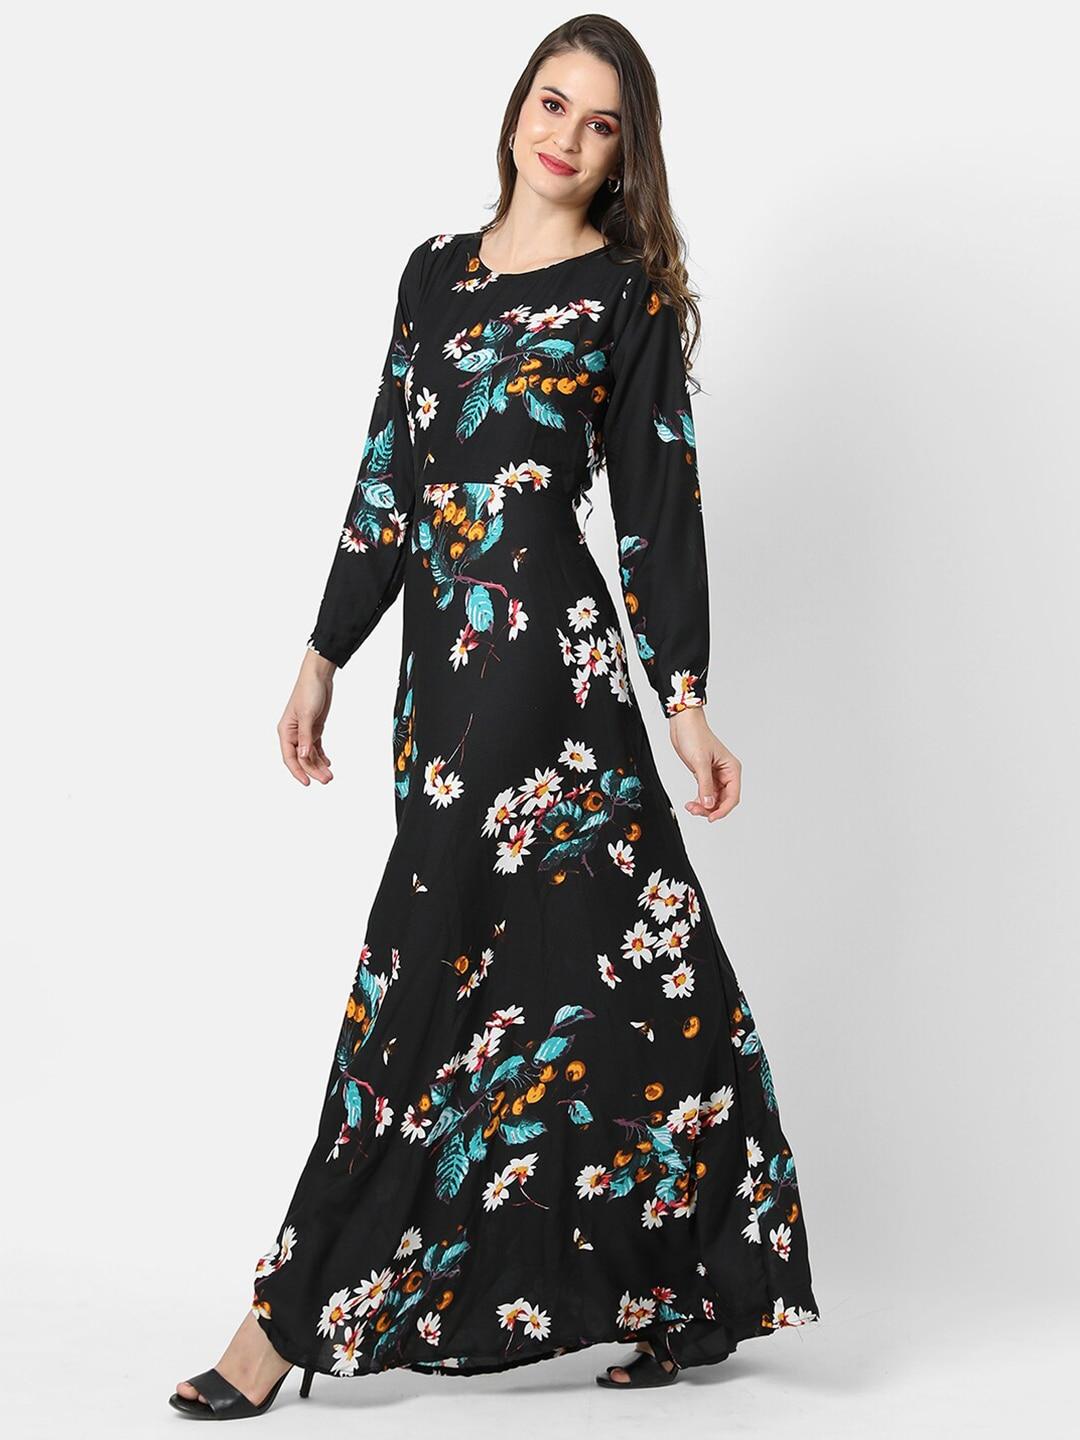 campus-sutra-black-&-white-floral-printed-maxi-dress